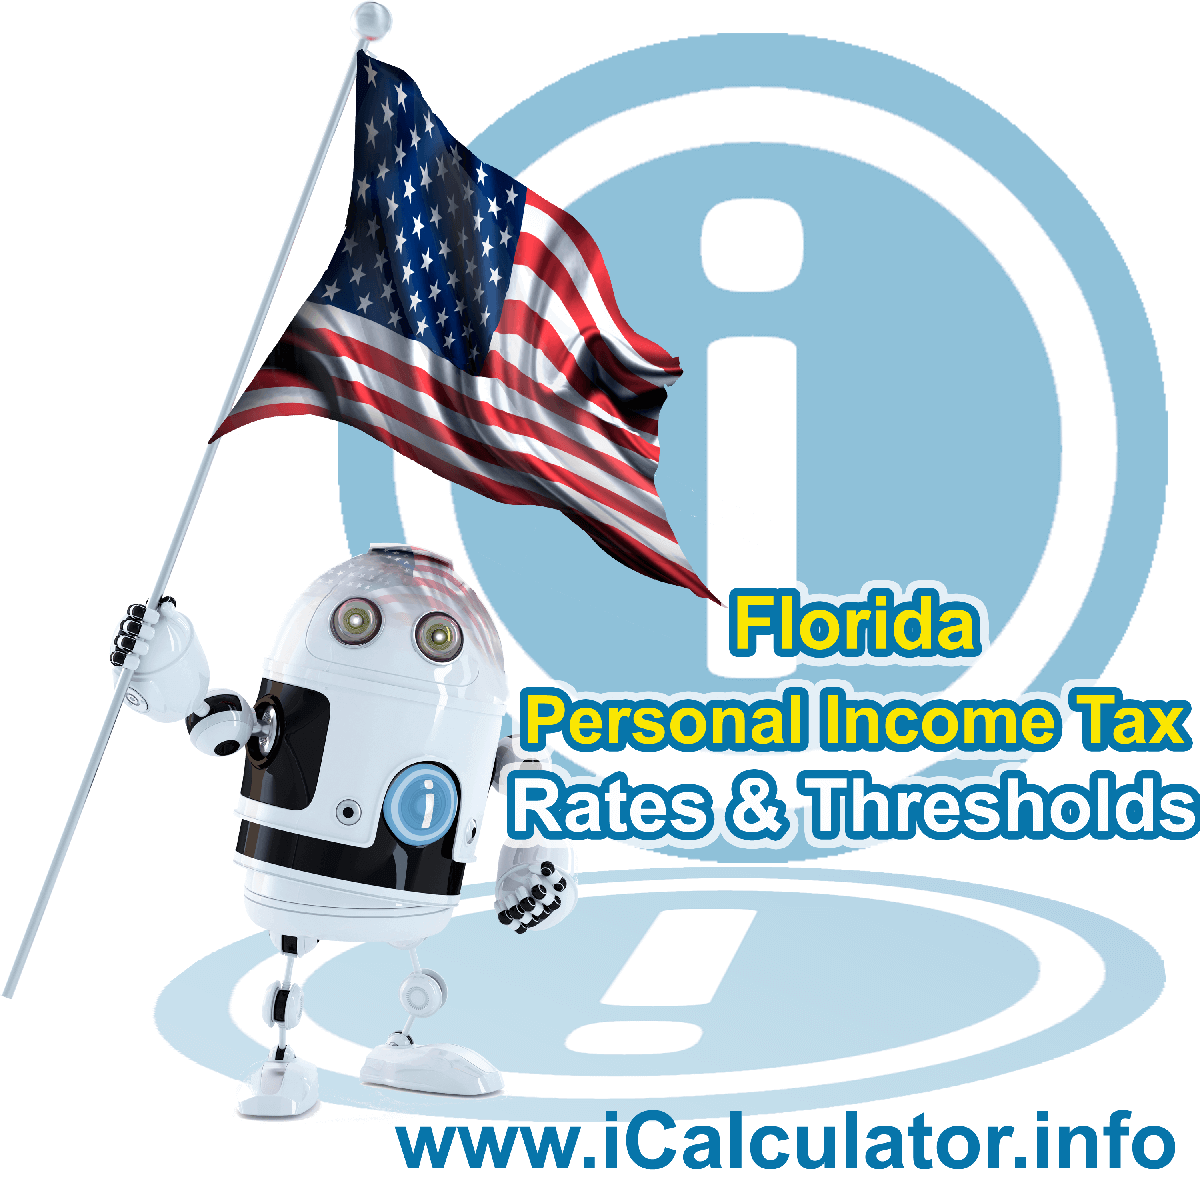 Florida State Tax Tables 2013. This image displays details of the Florida State Tax Tables for the 2013 tax return year which is provided in support of the 2013 US Tax Calculator